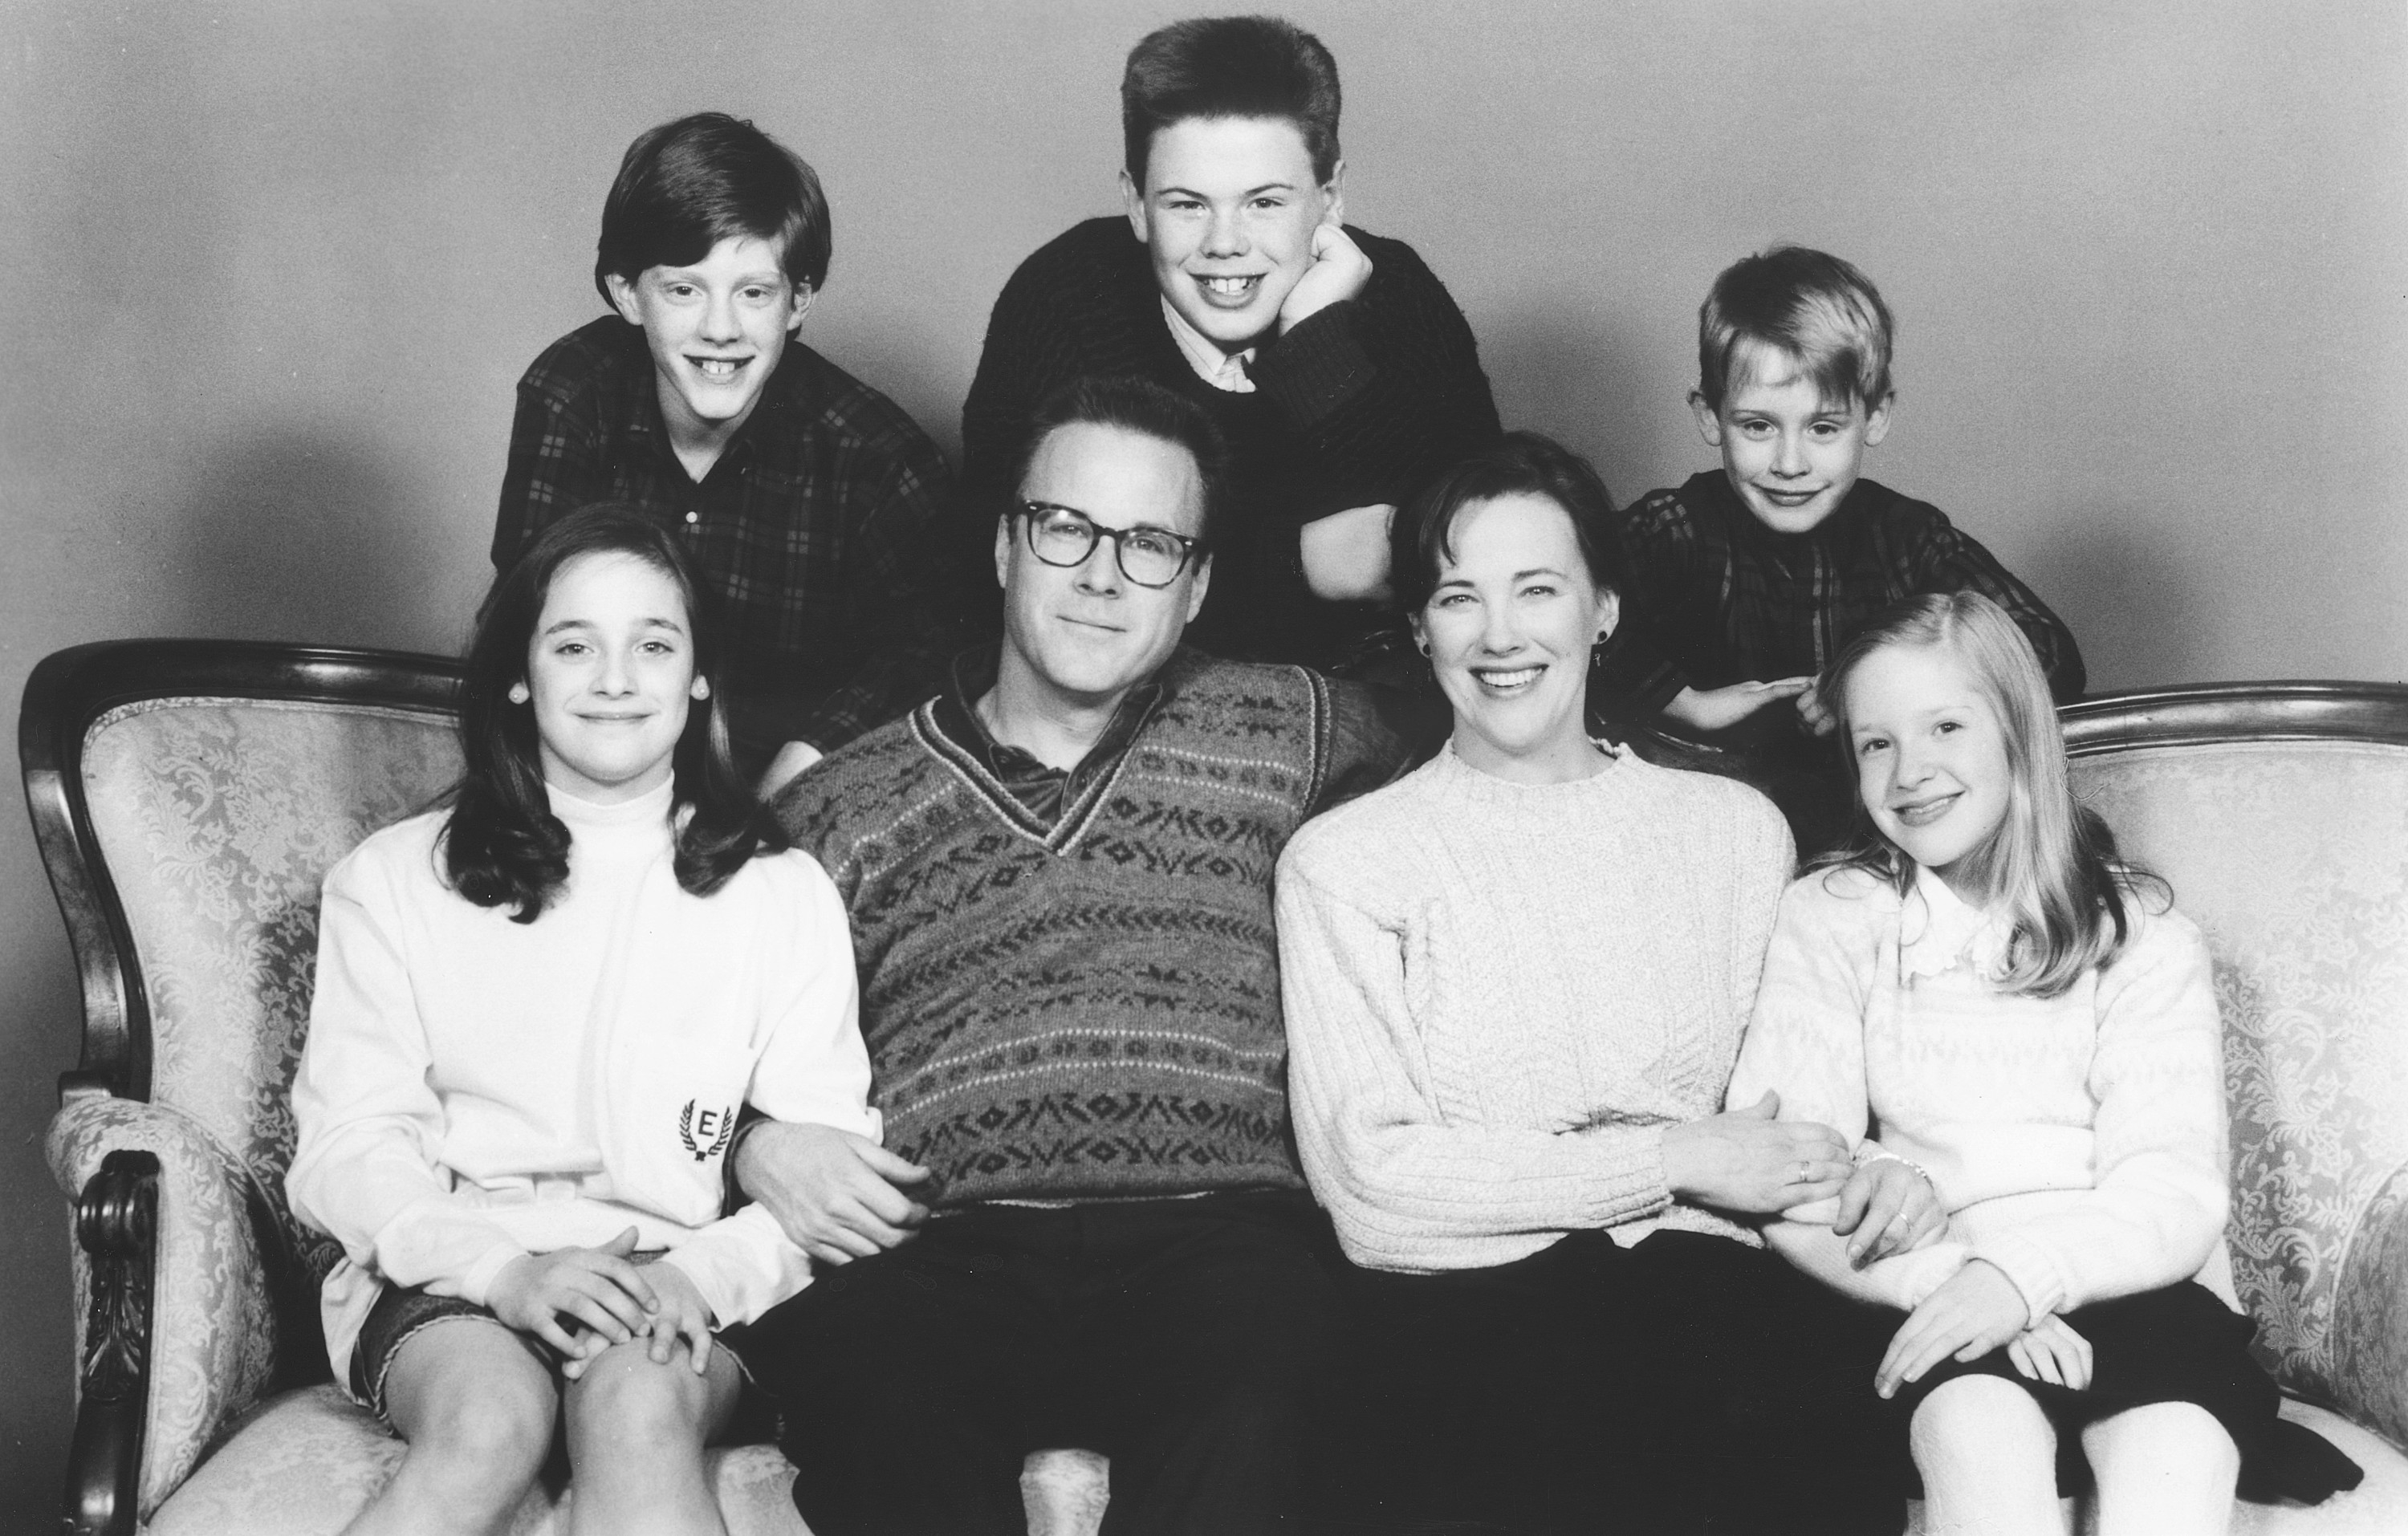 The McCallister family smiling on a couch